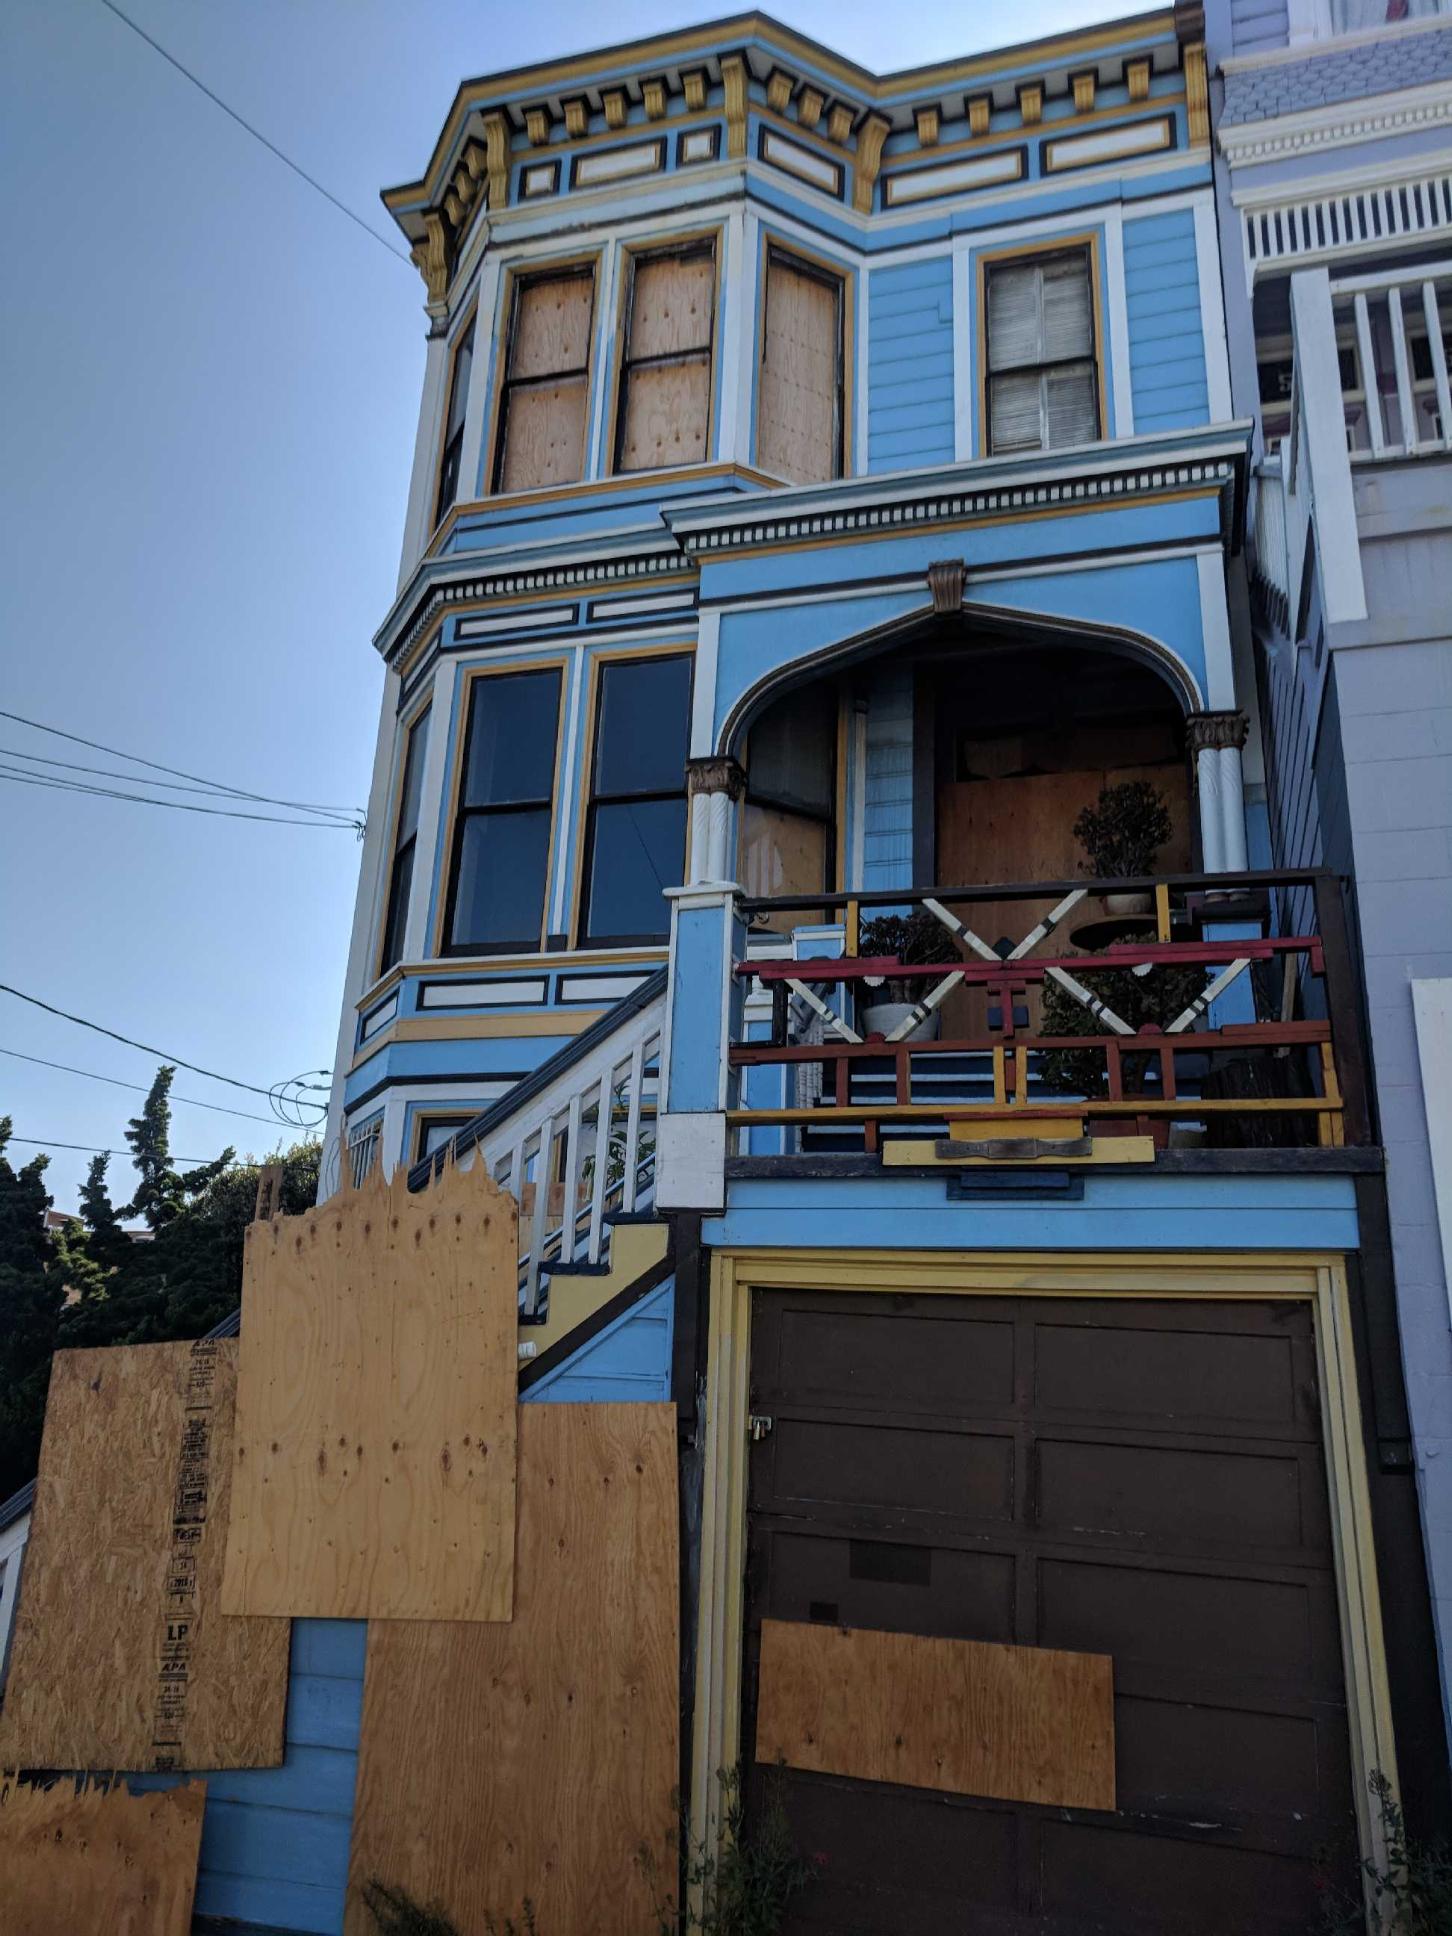 Fire-ravaged San Francisco home once labeled a 'drug den' sells for $2 million - SFGate1452 x 1936